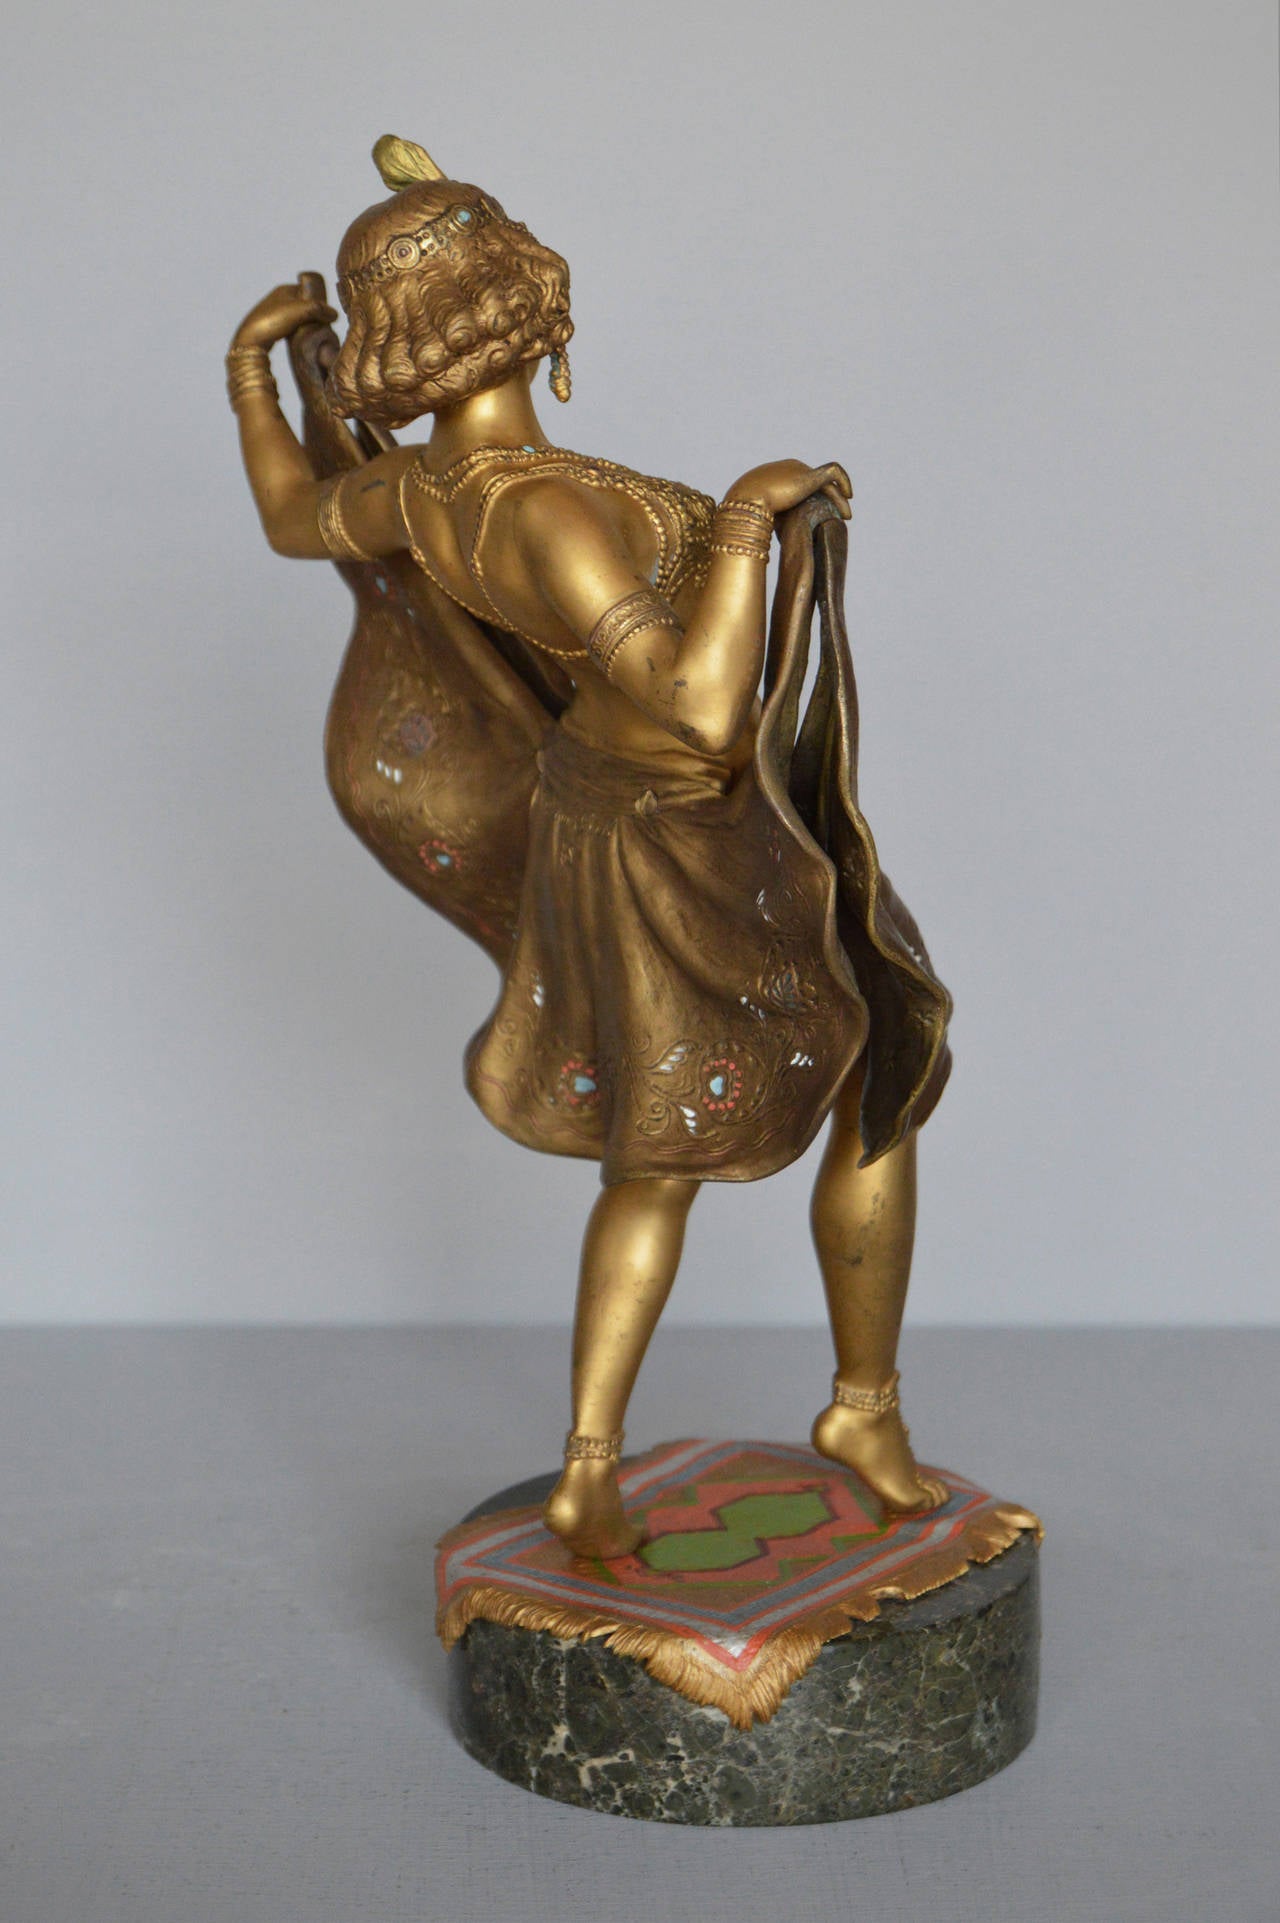 Cold-Painted Windy Day, Cold Painted Bronze Sculpture by Bergman For Sale